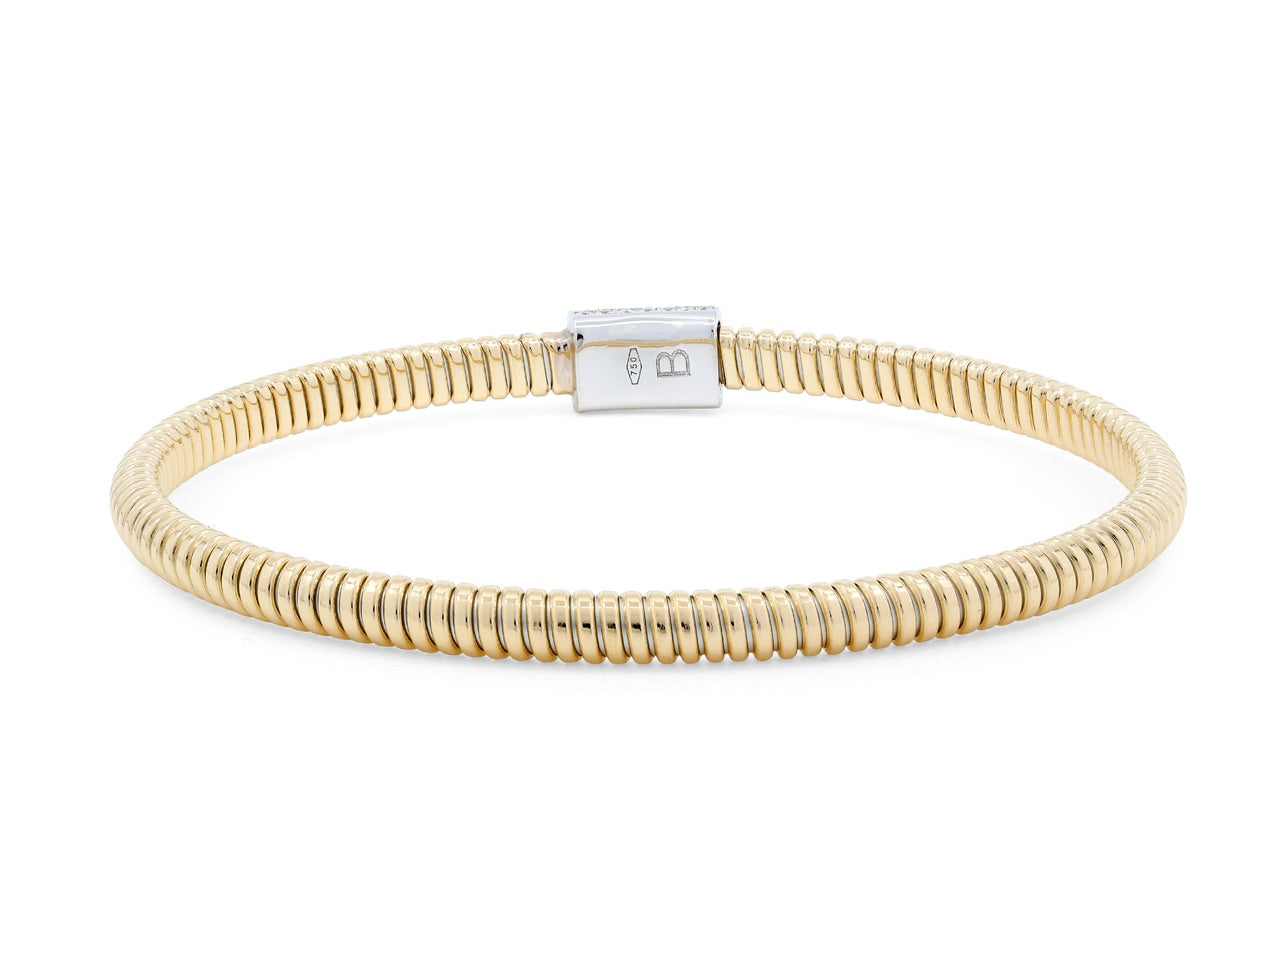 Thin Tubogas Bracelet with Diamond Clasp, in 18K Yellow Gold, by Beladora